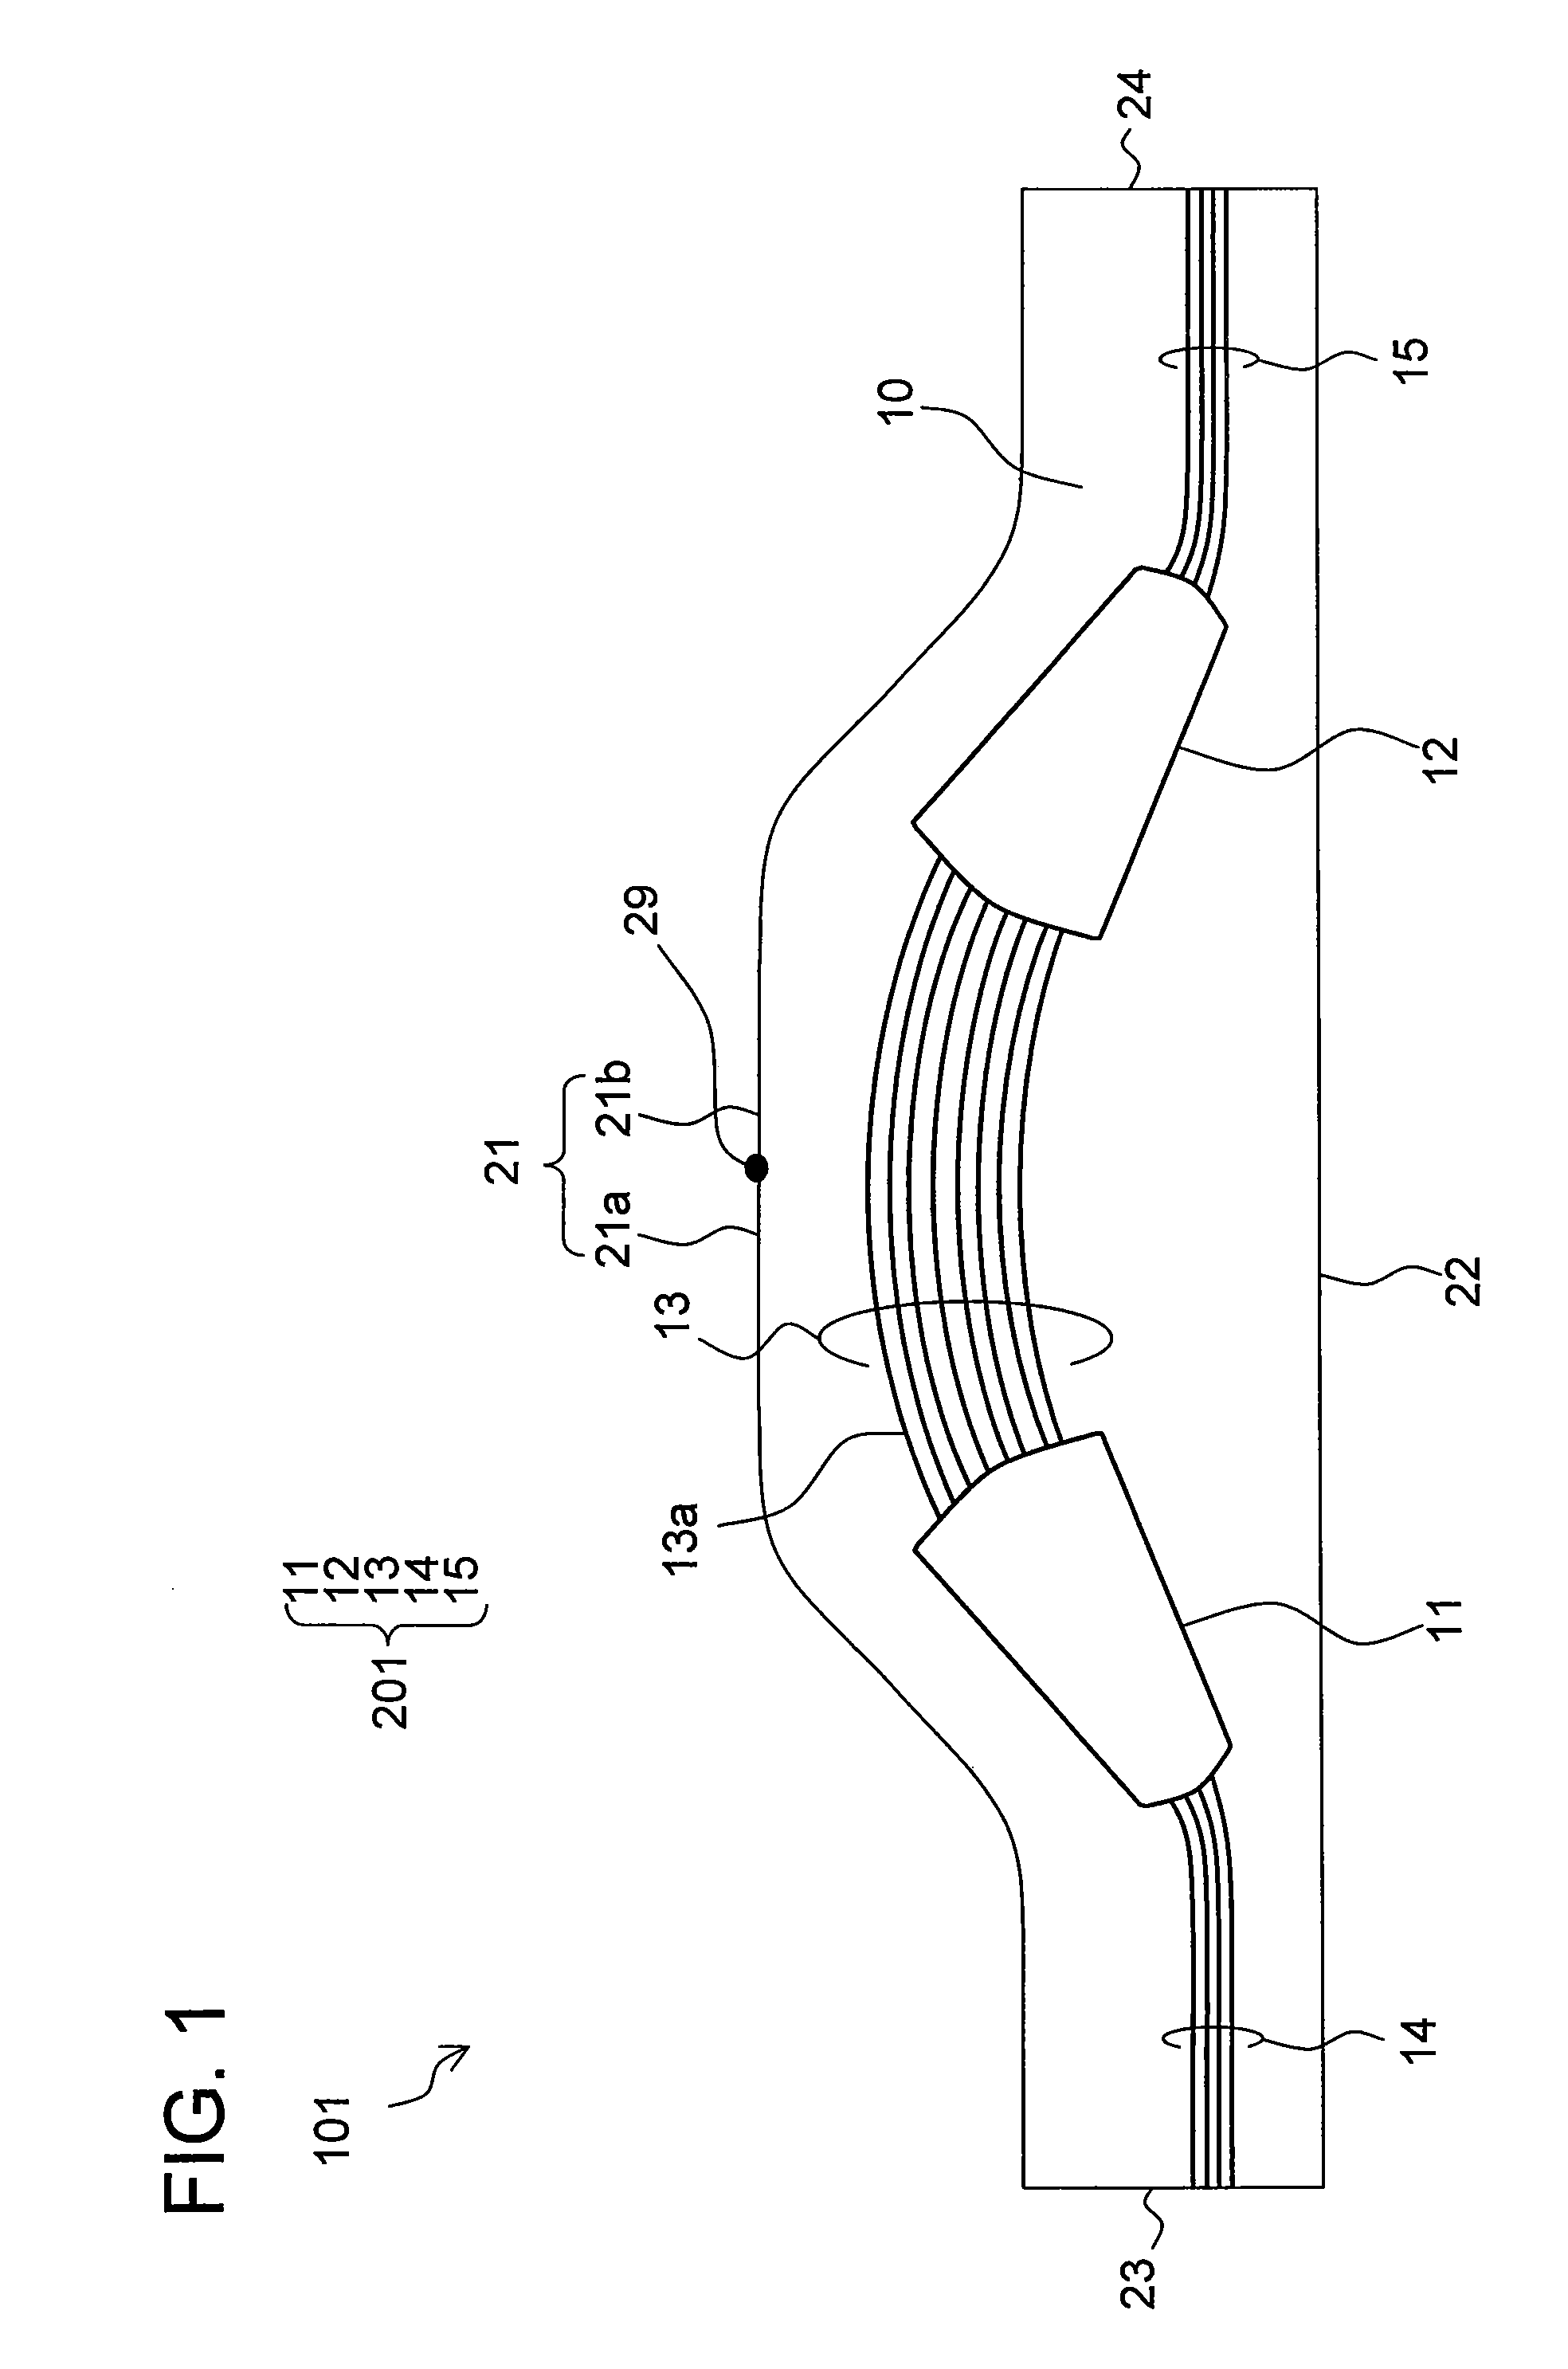 Optical chip for arrayed waveguide grating type optical multiplexer/demultiplexer circuit, waveguide substrate, and method for fabricating optical chip for arrayed waveguide grating type optical multiplexer/demultiplexer circuit